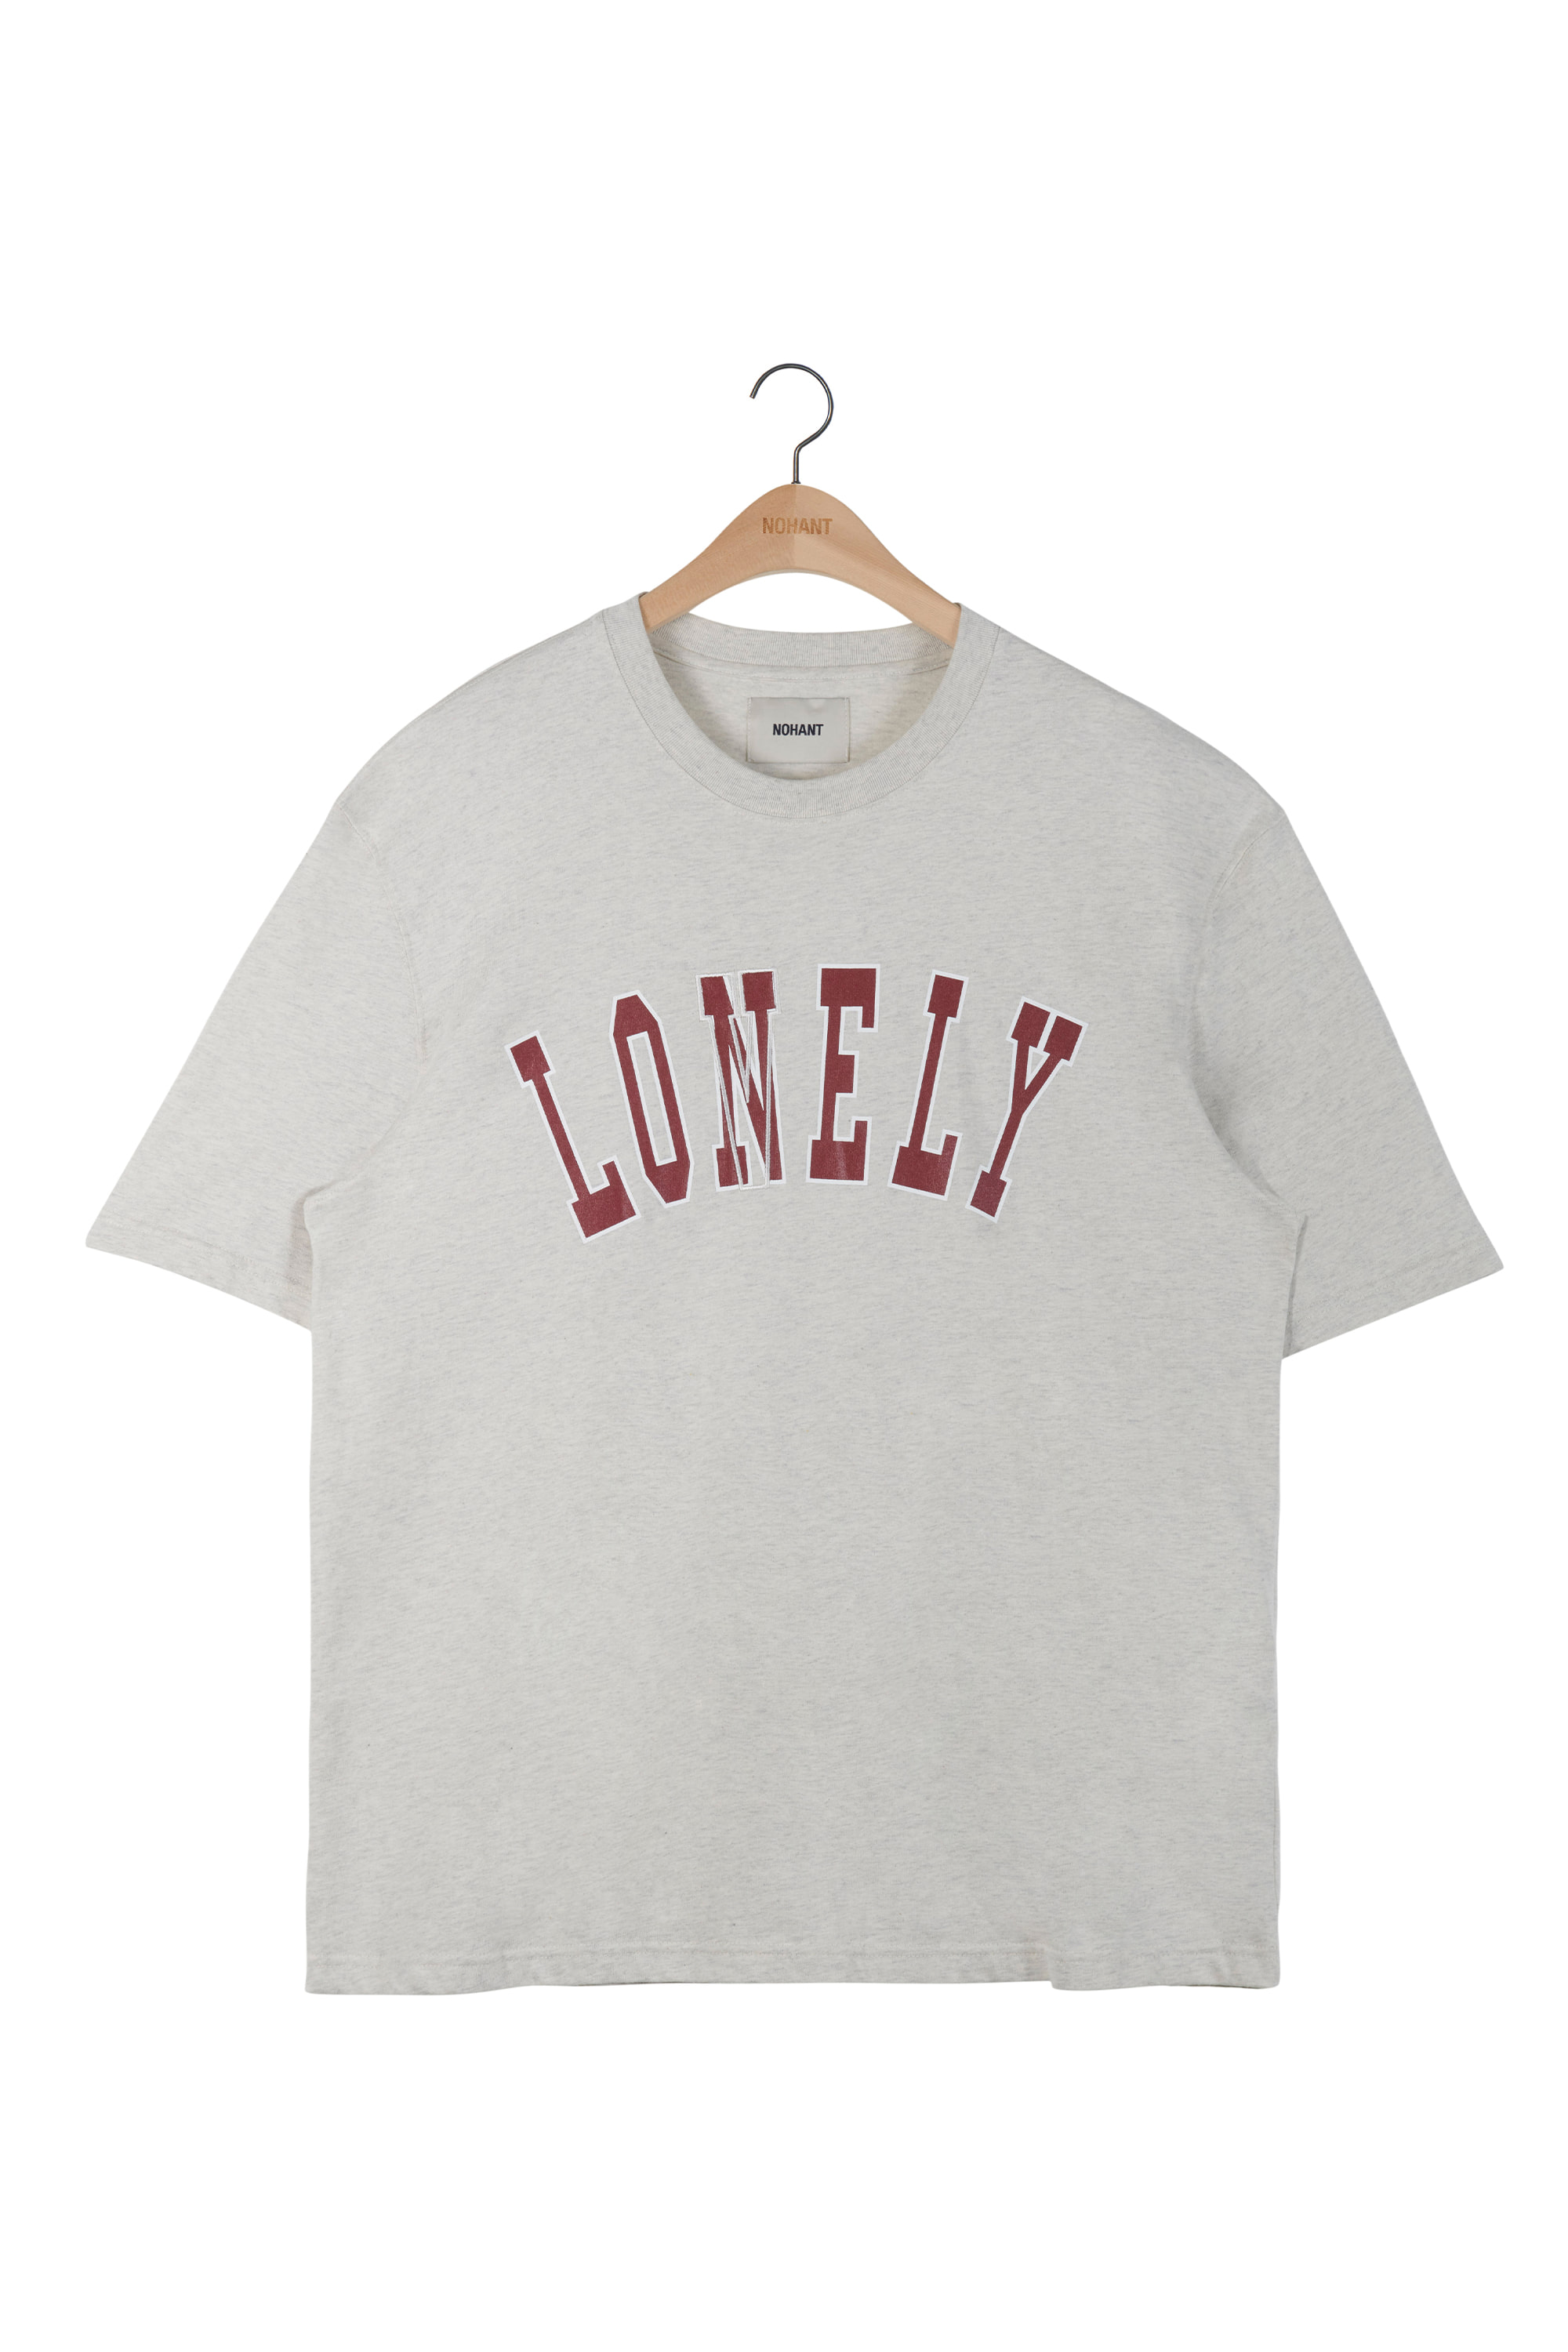 [CARRY OVER] LONELY/LOVELY SHORT SLEEVE T SHIRT OATMEAL